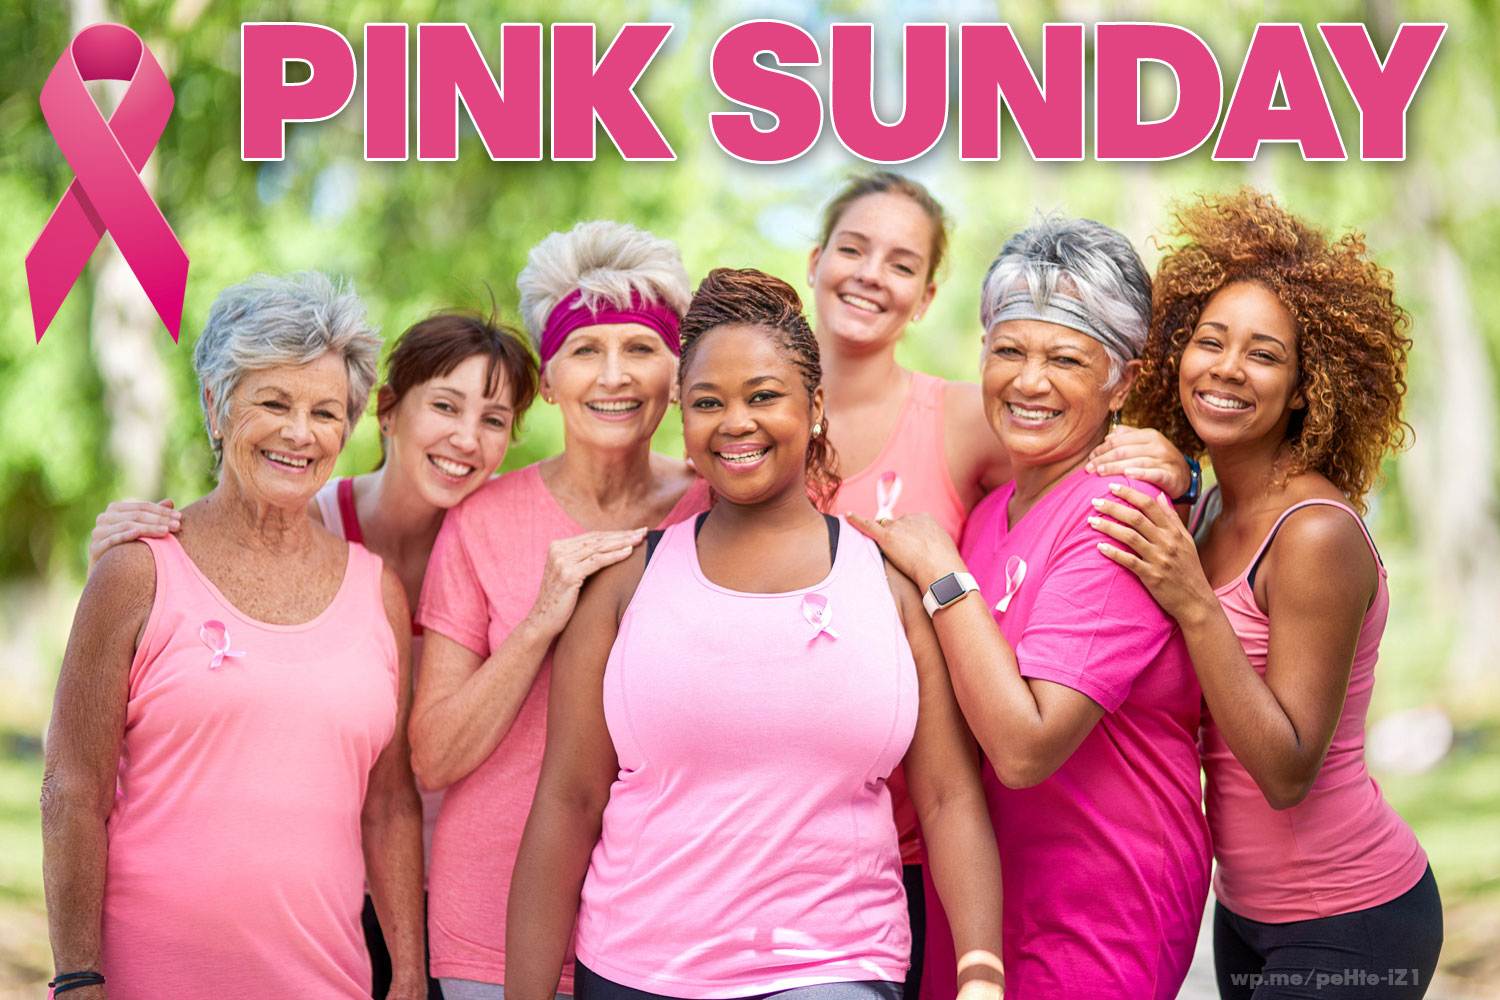 Pink Sunday - a day in October to wear pink in support or memory of someone with Breast Cancer. #PinkSunday #BreastCancer #PinkRibbon